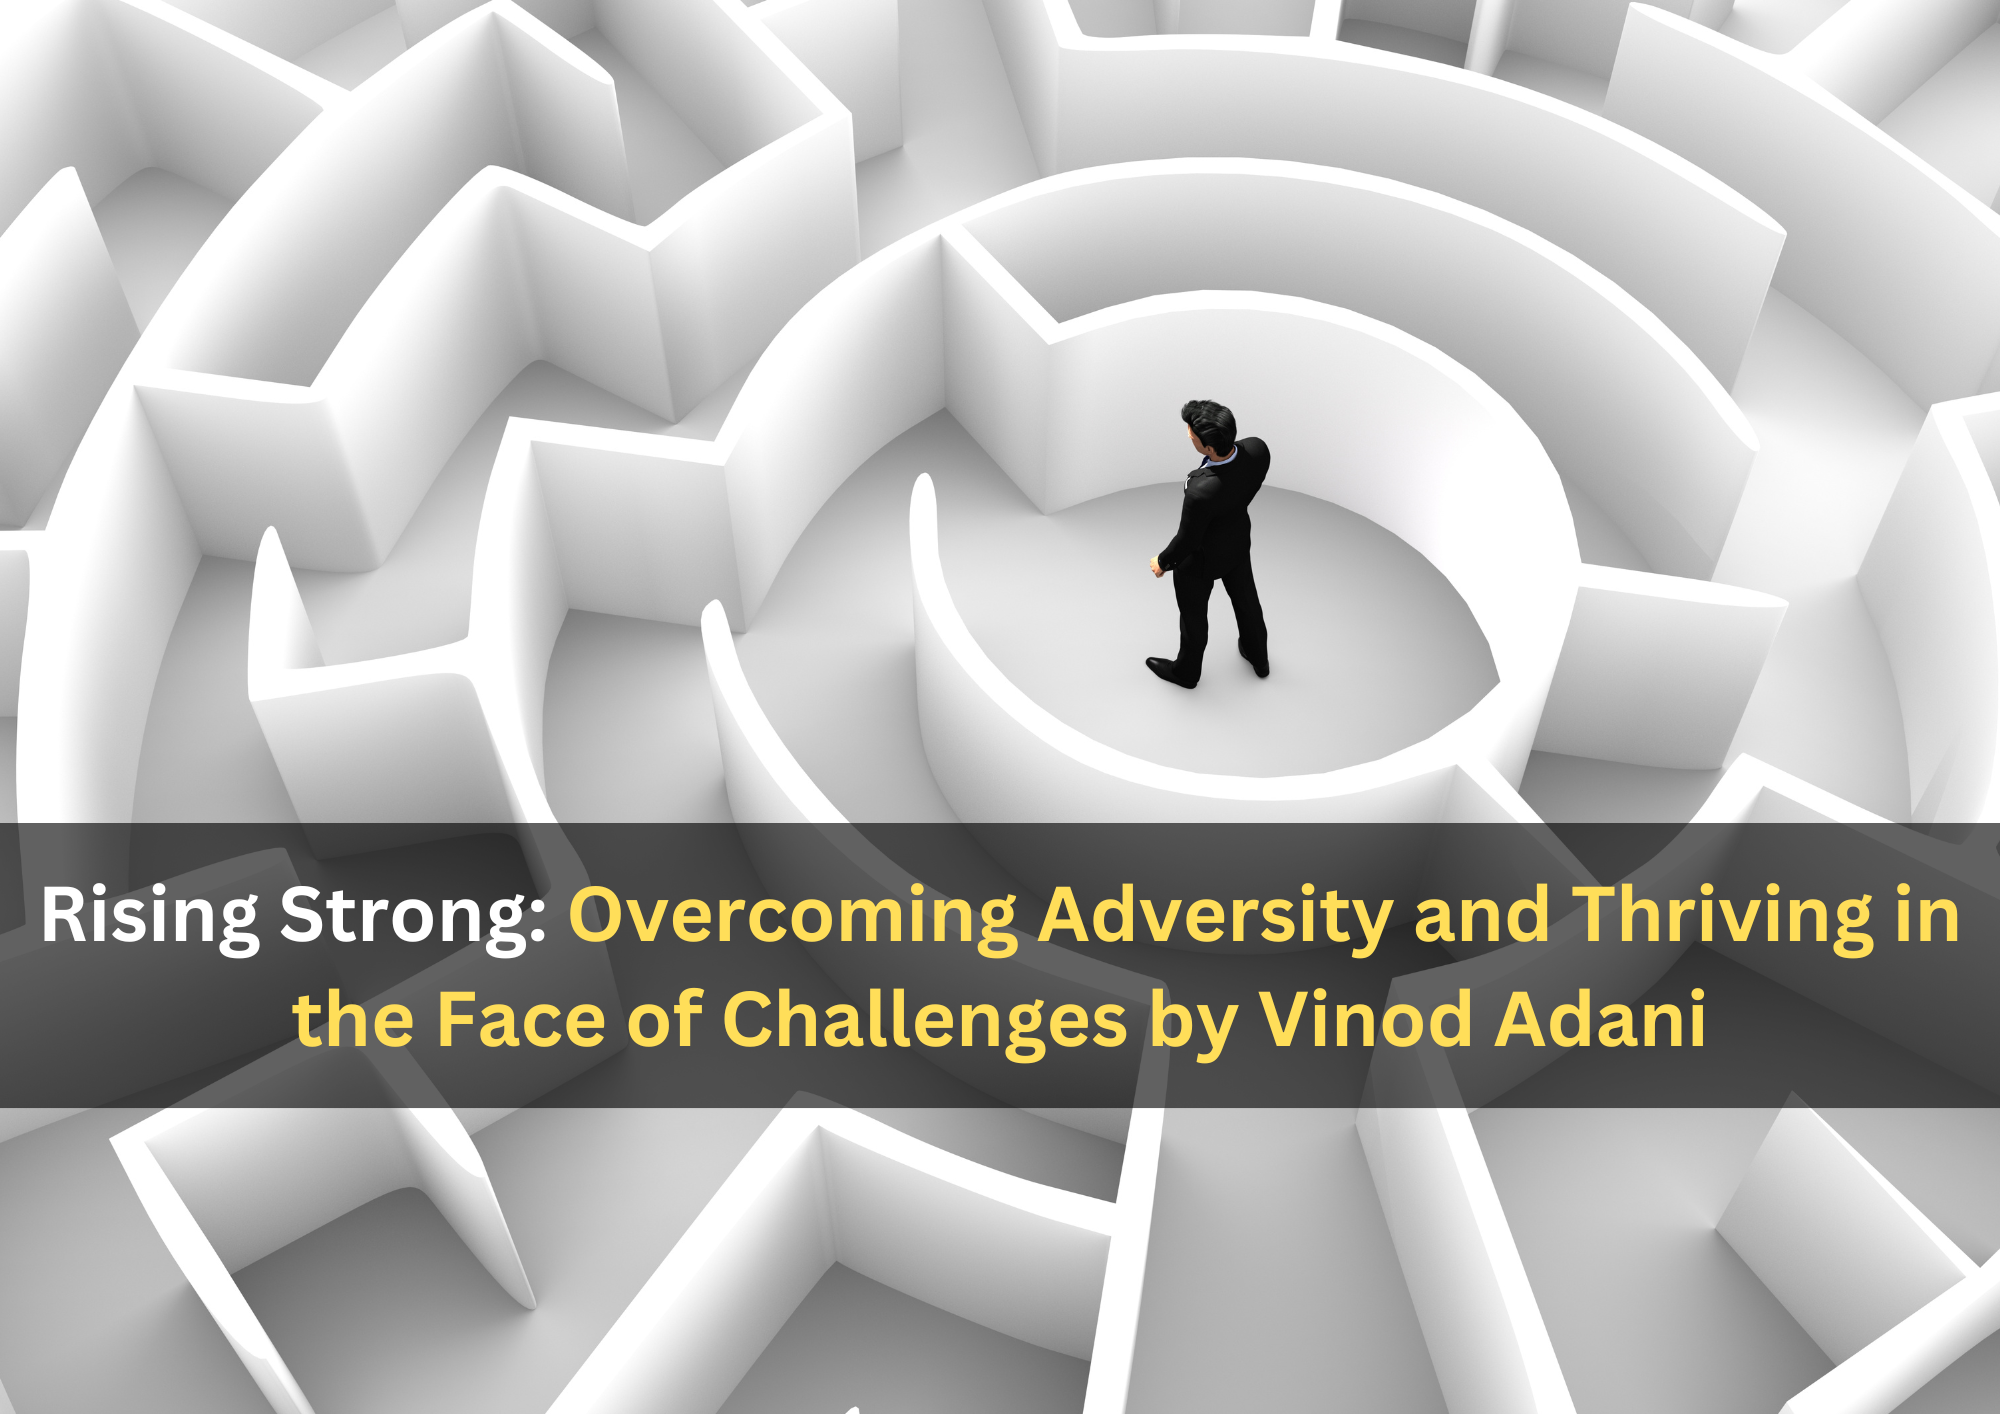 Rising Strong Overcoming Adversity and Thriving in the Face of Challenges by Vinod Adani